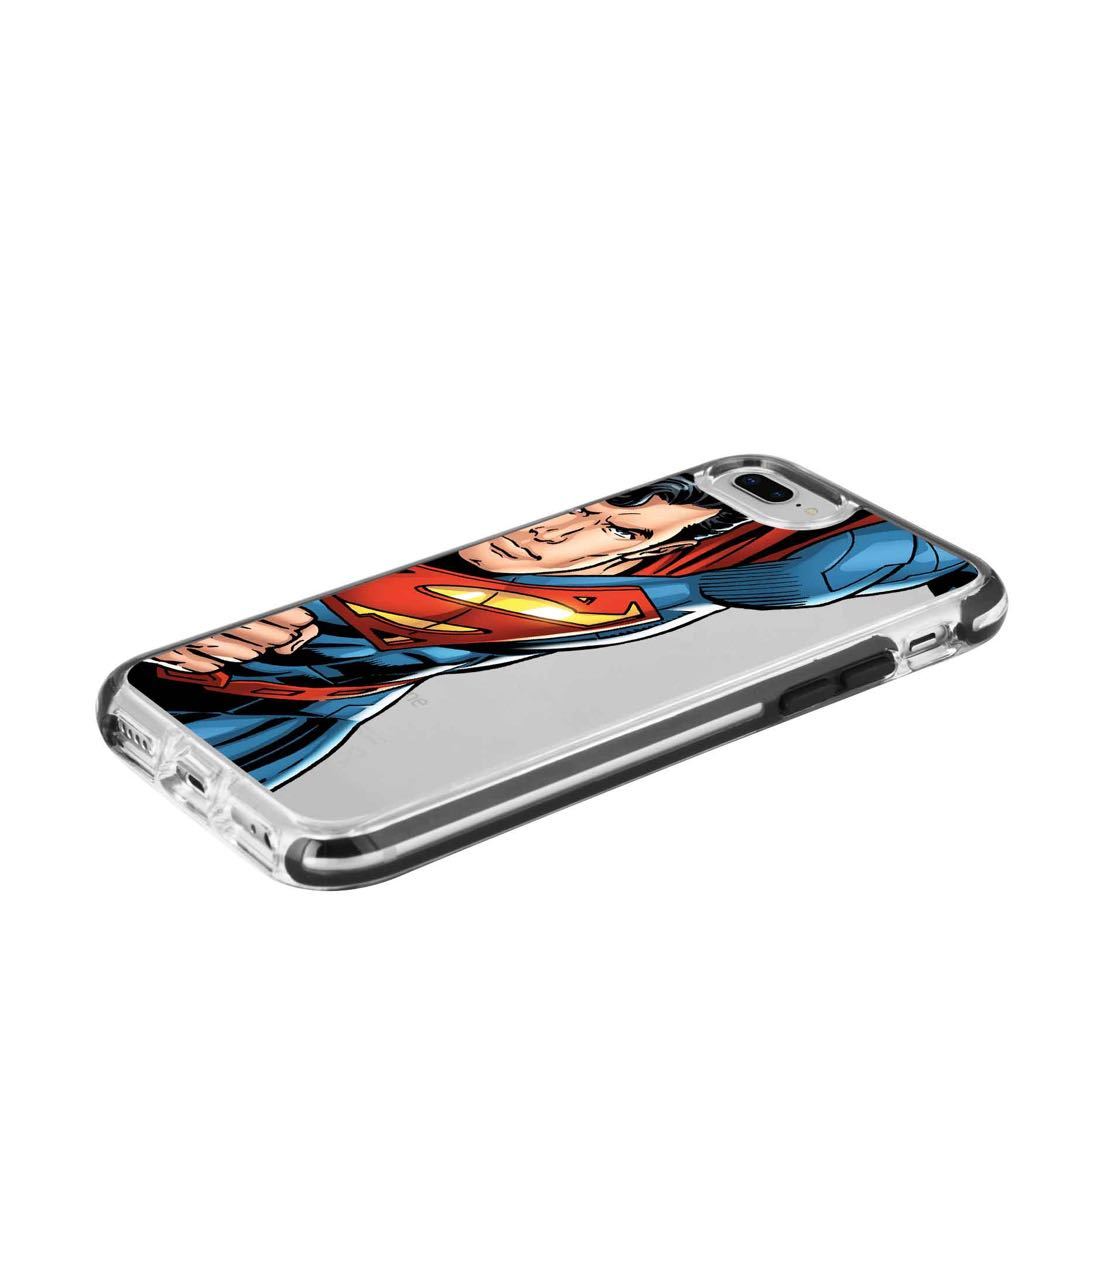 Speed it like Superman - Extreme Phone Case for iPhone 8 Plus